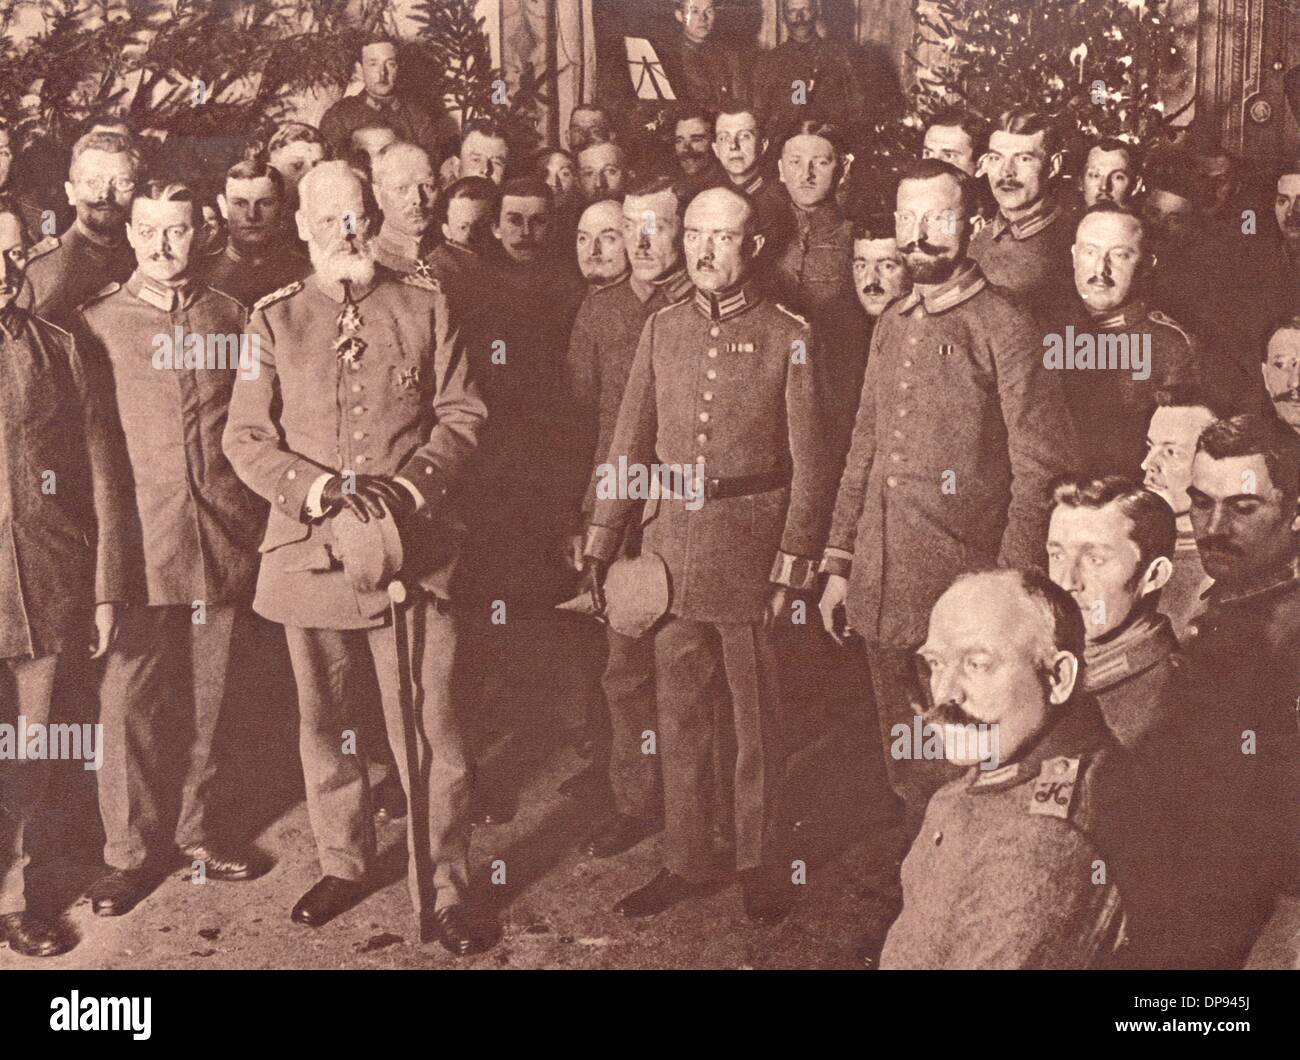 General field marshall Leopold von Bayern (l, with beard) is pictured on the event of the ceasefire agreement between the Central Powers and the Soviet Republic in Brest-Litovsk on 15 December 1917. The peace negotiations ended with the peace treaty of Brest-Litovsk signed on 3 March 1918 with the Soviet Union withdrawing from the war. Photo: Berliner Verlag/Archiv Stock Photo